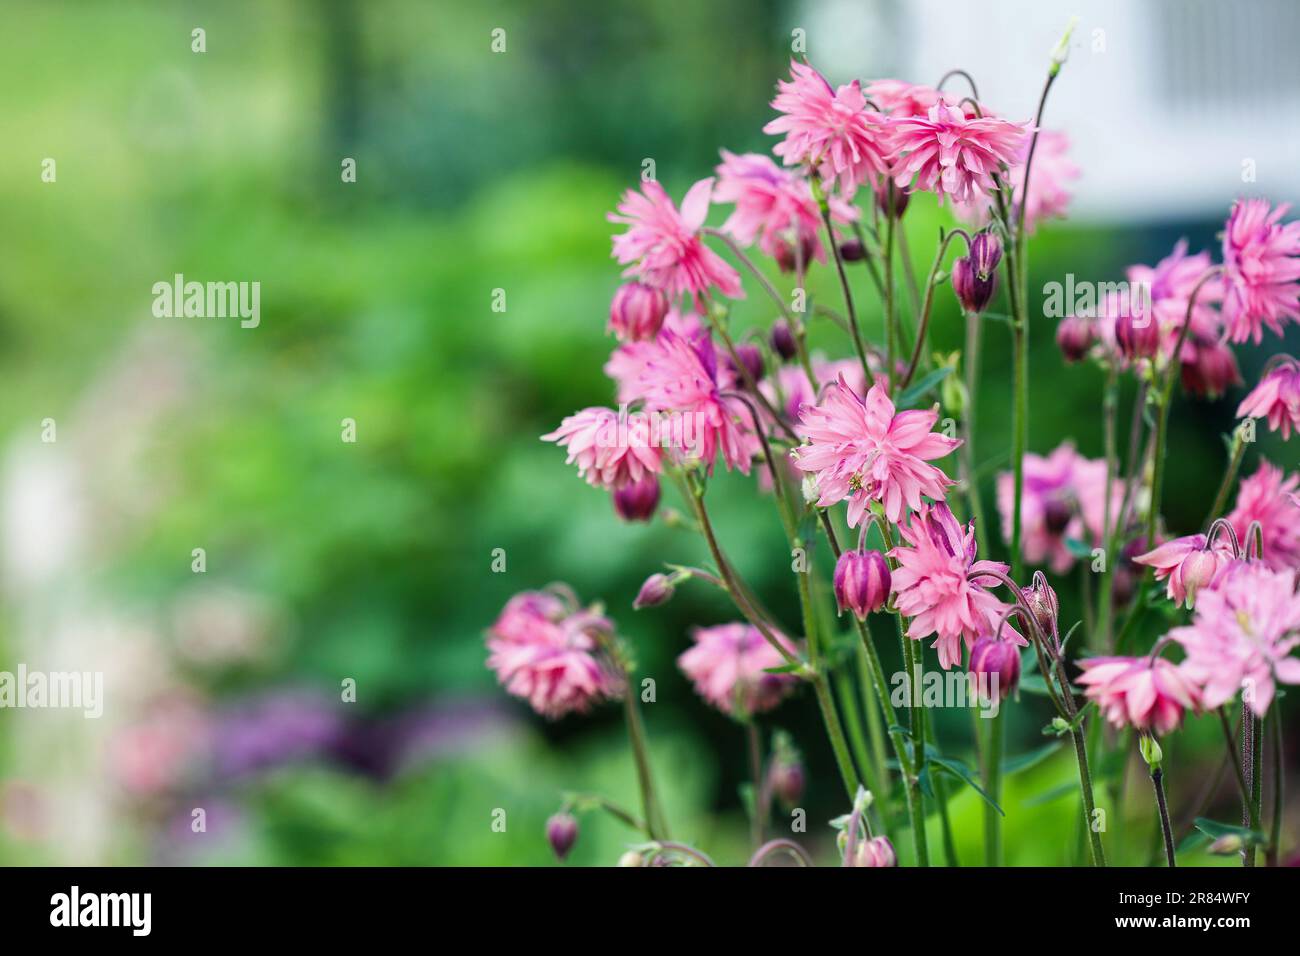 Abstract of lovely Aquilegia vulgaris 'Clementine Salmon-Rose' blossoms in the flower garden. Selective focus with blurred foreground and background. Stock Photo